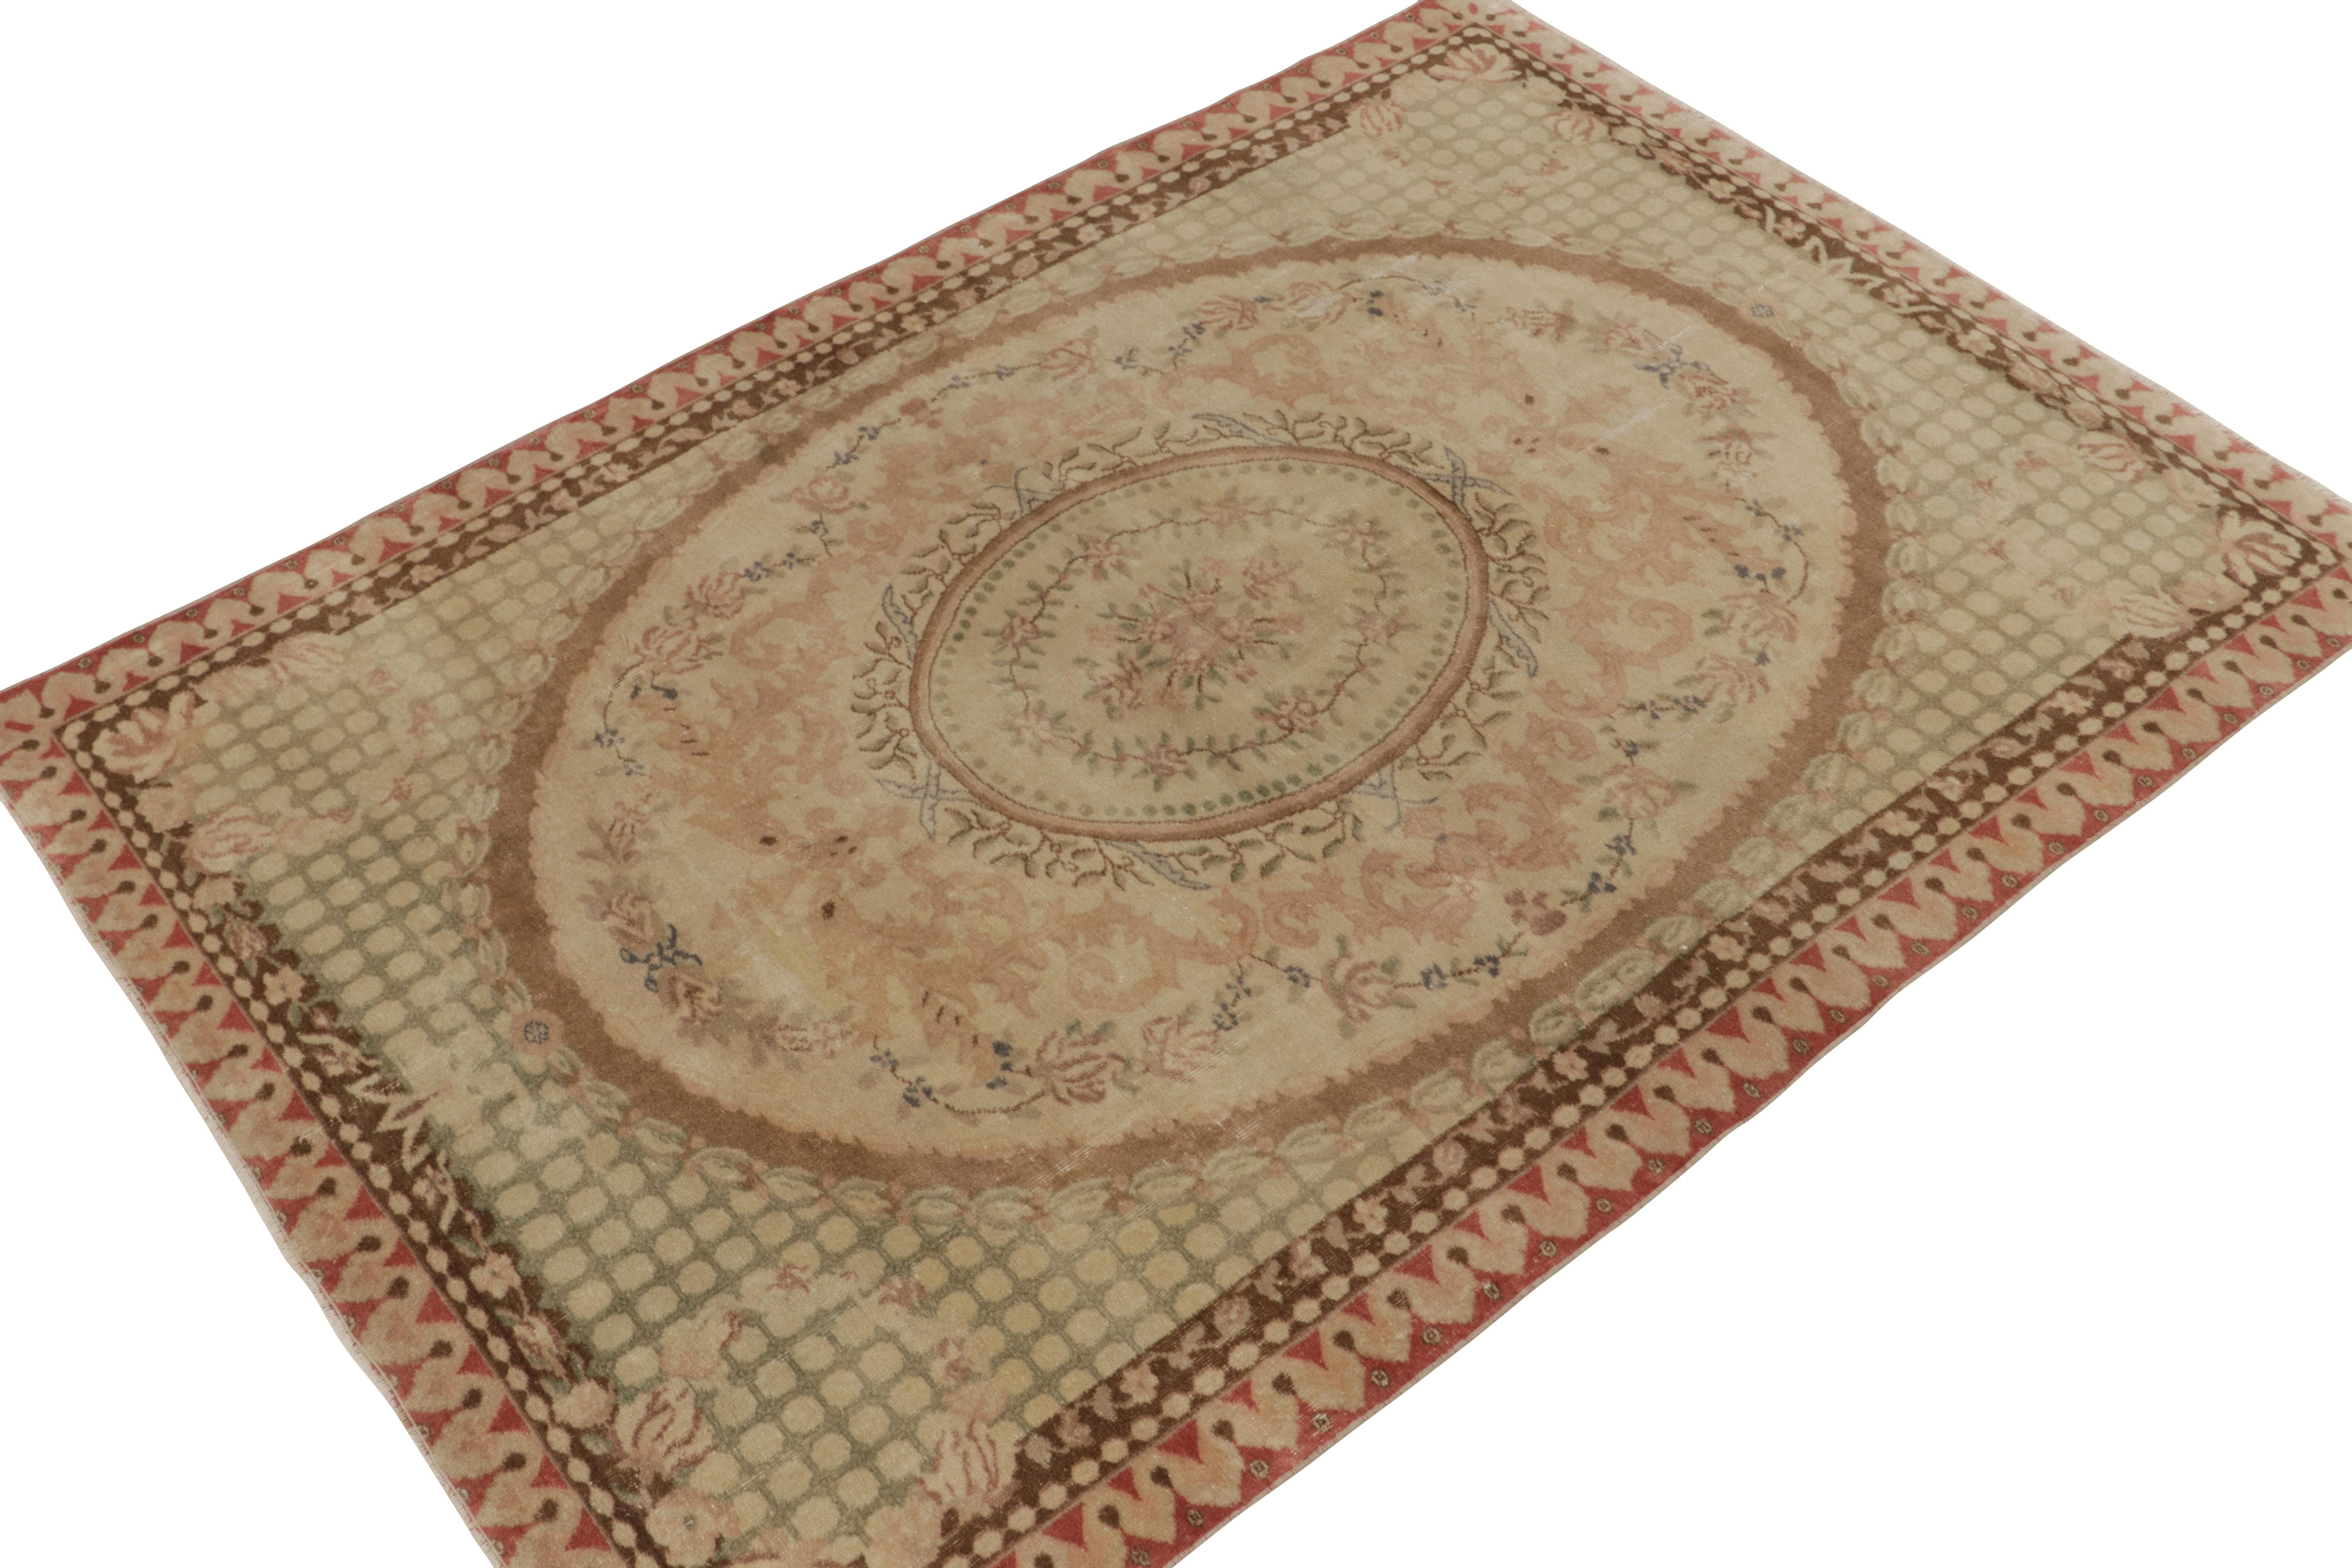 Originating from Turkey circa 1950-1960, this vintage mid-century rug draws unique inspiration from 18th-century Aubussons—a renowned European style. This particular design marries elegant cartouche medallions and floral patterns in pink, green &